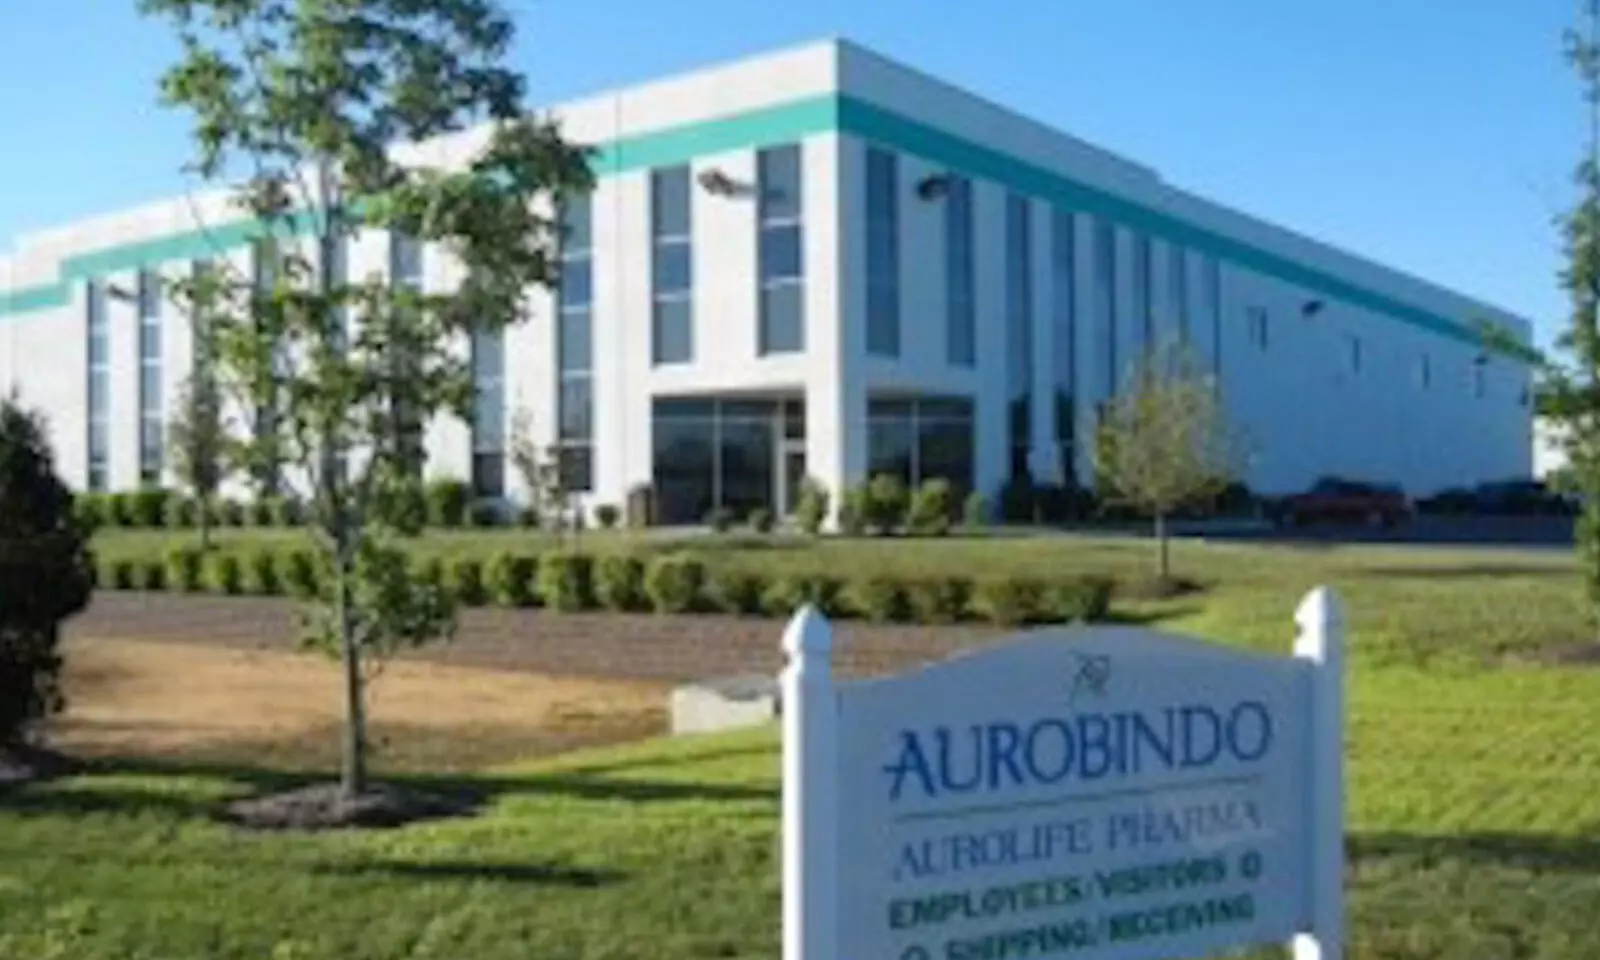 Aurobindo Pharma on track to develop complex products, expand global footprint